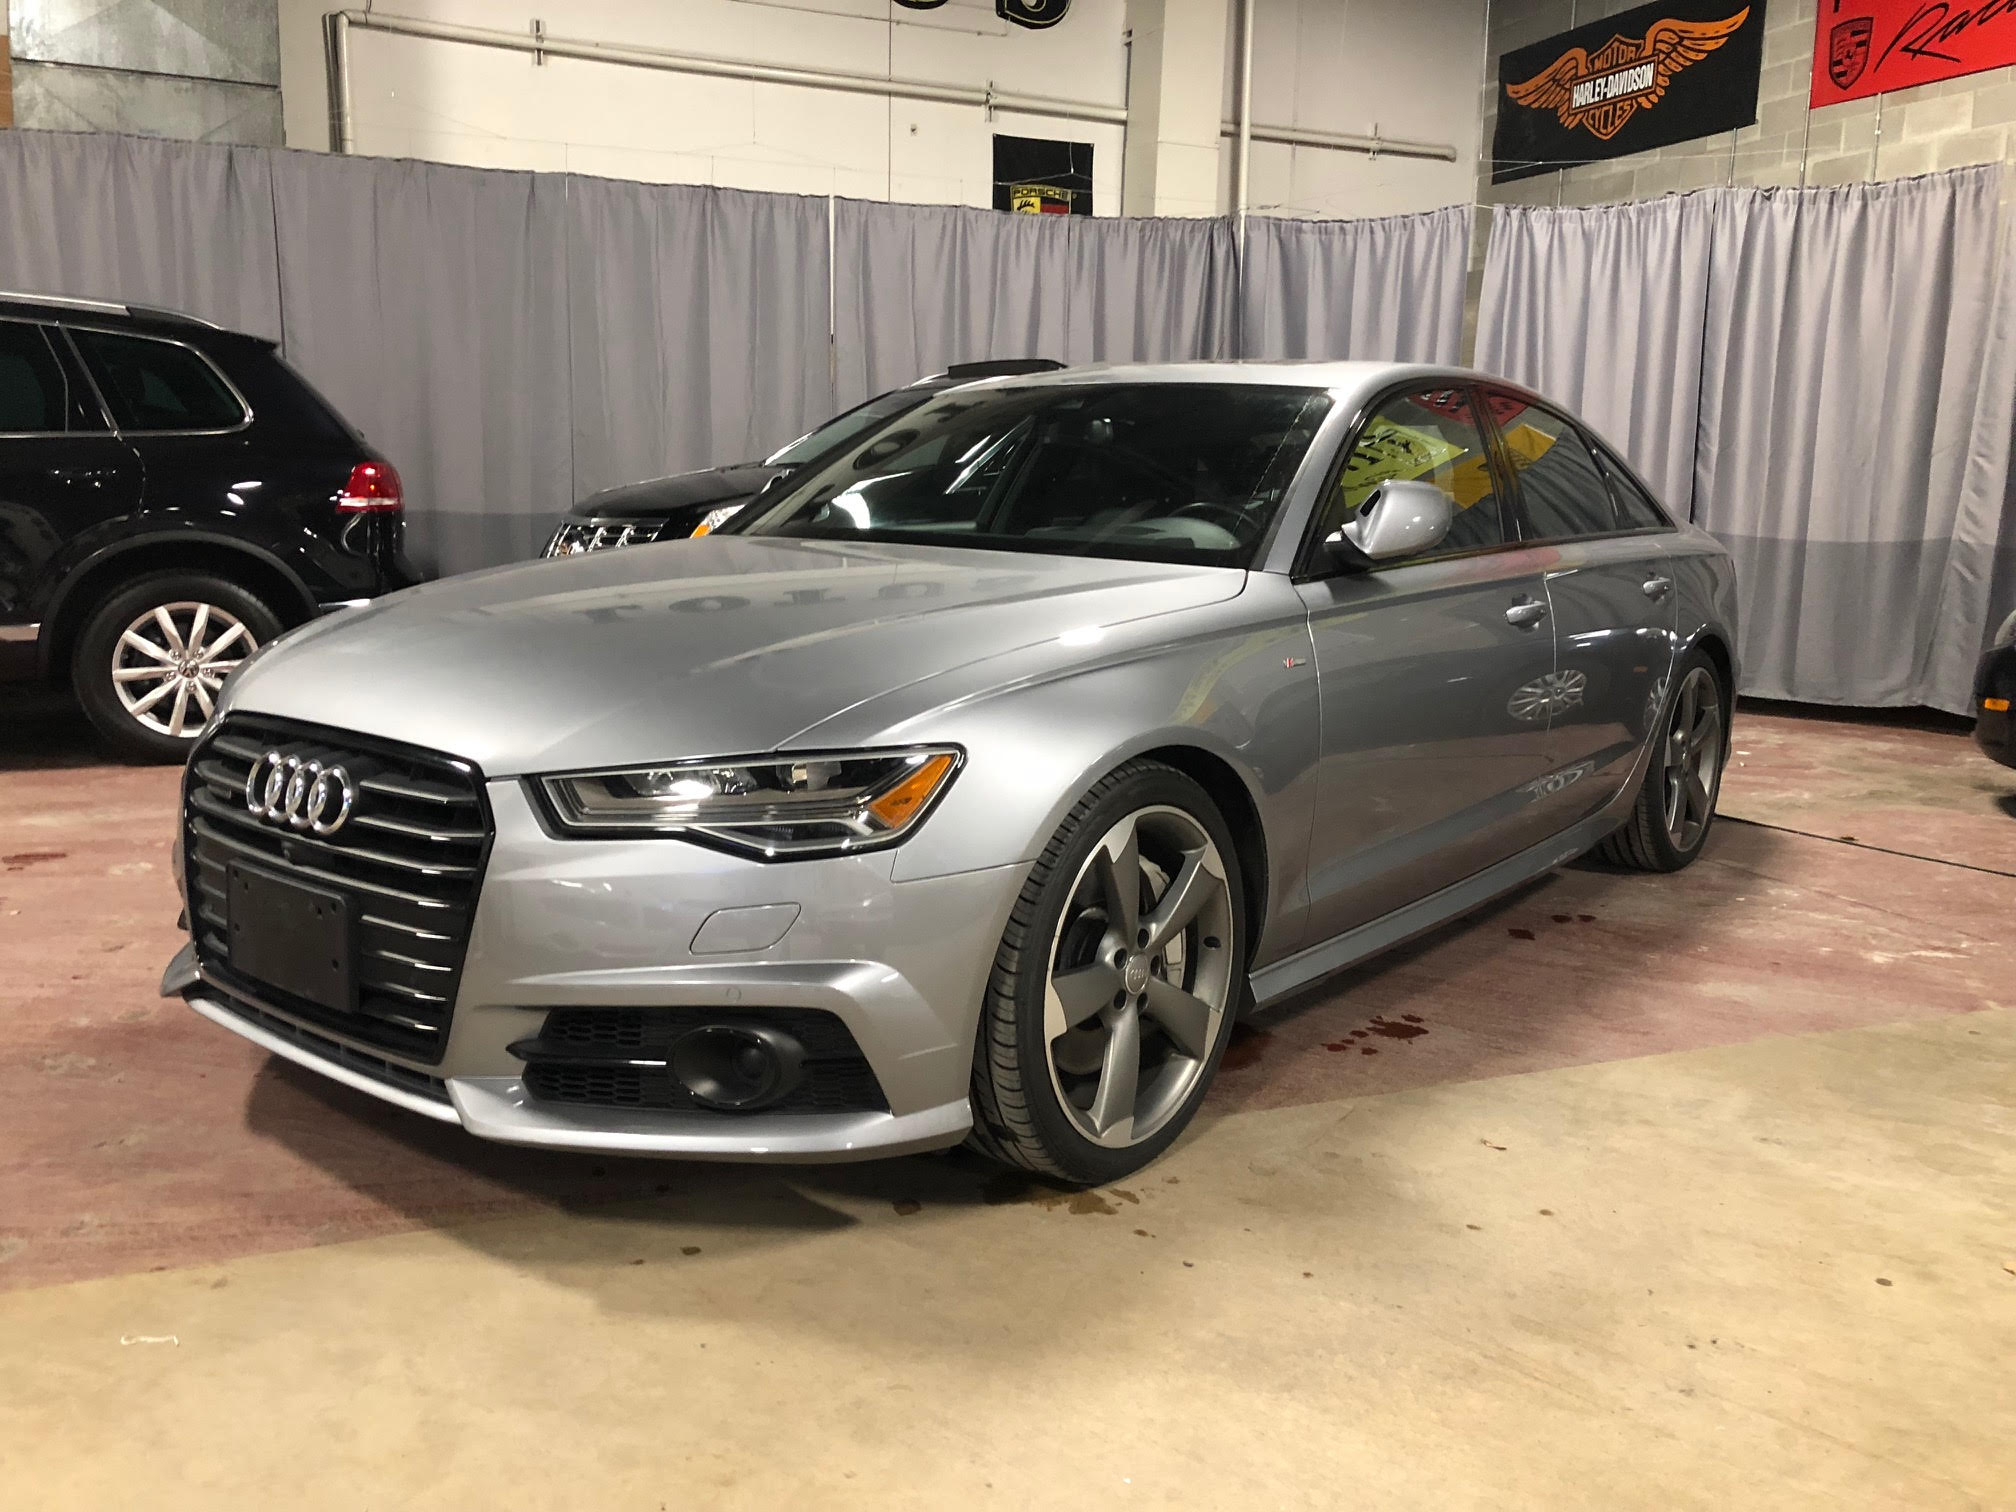 Best Mods and Maintenance for your Audi B7 A4 2.0T – ECS Tuning